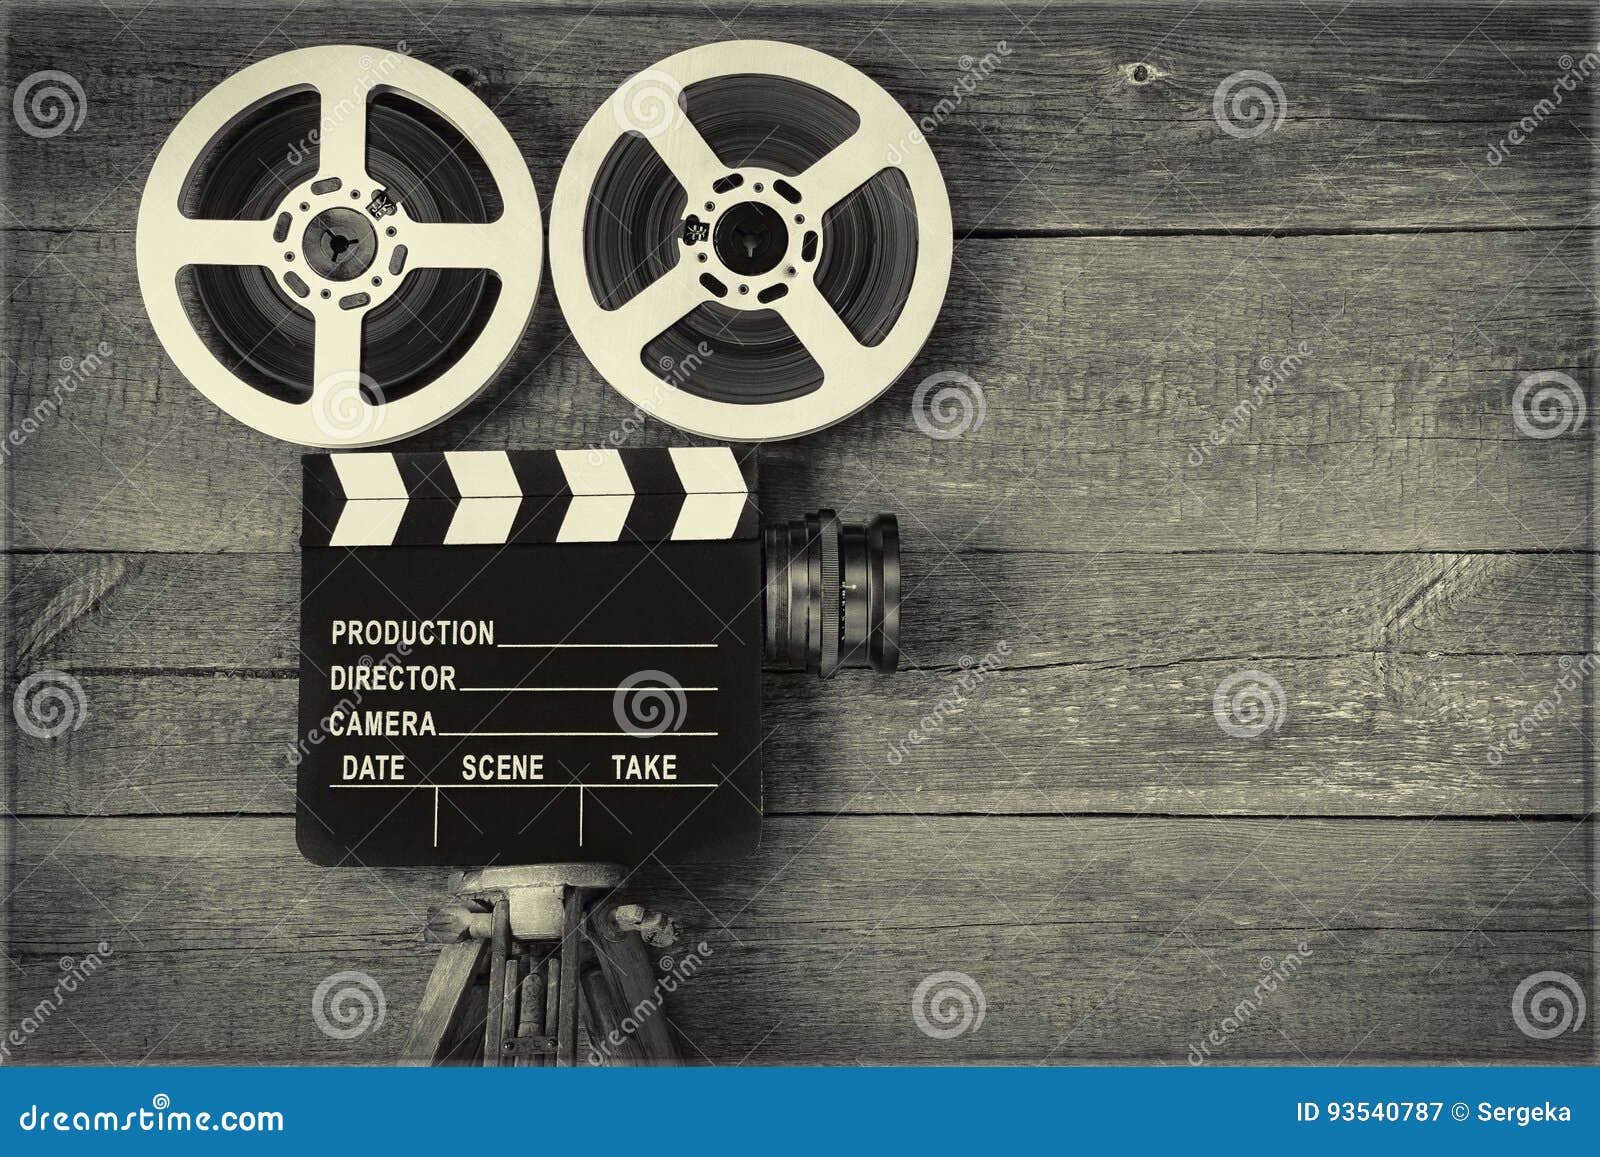 Old movie camera stock image. Image of obsolete, background - 93540787